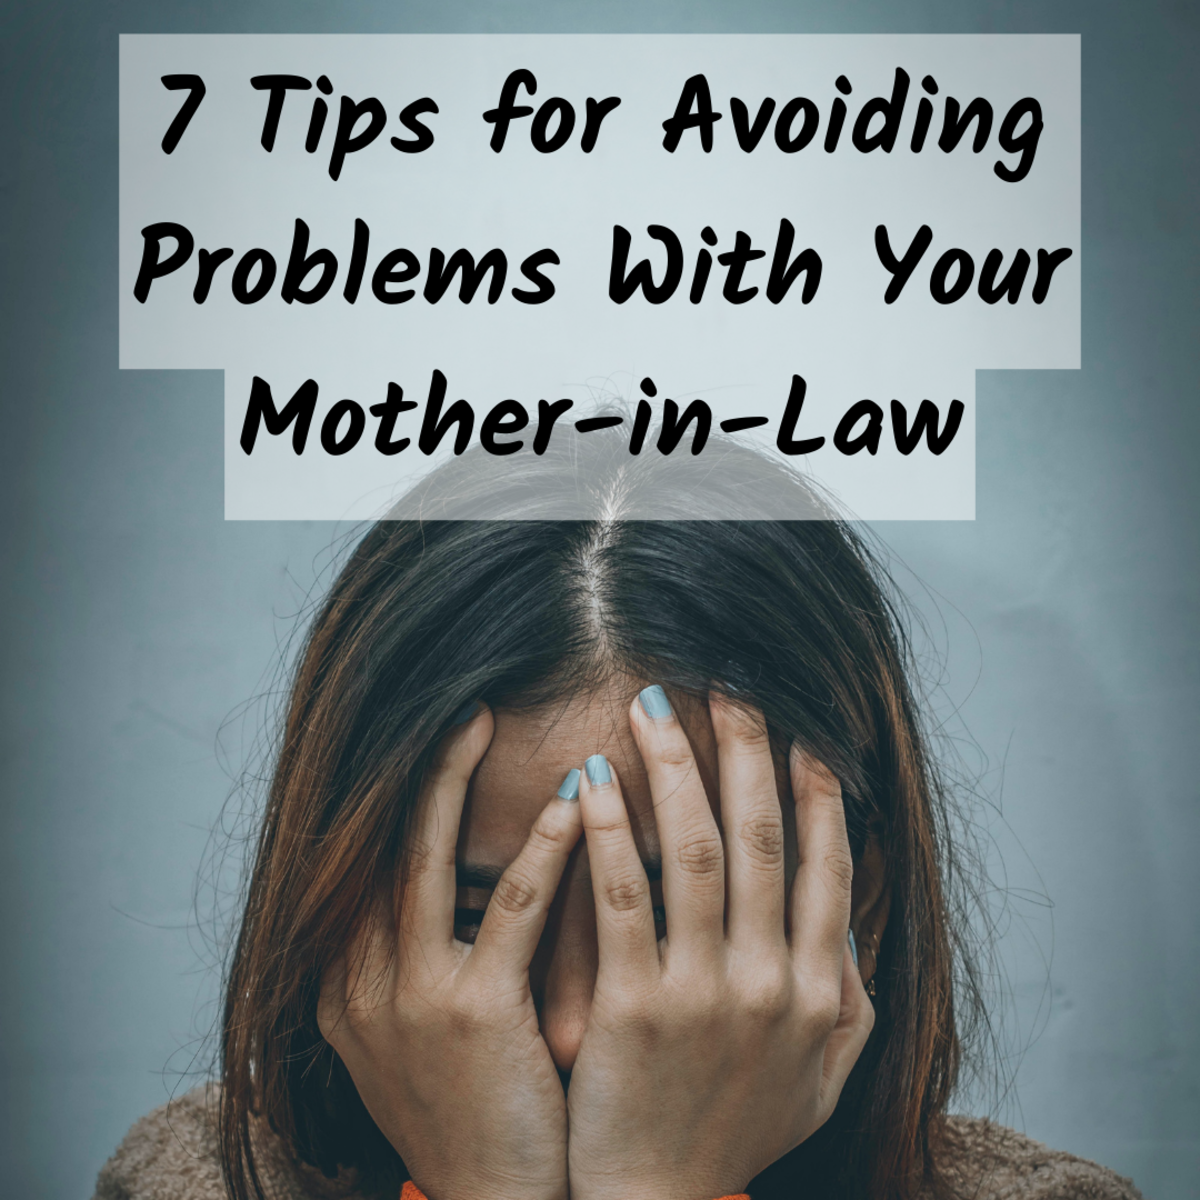 Read on to learn how to navigate the sometimes difficult emotional terrain of mother-in-law/daughter-in-law relationships. This article provides 7 practical tips for mending and solidifying such a bond.